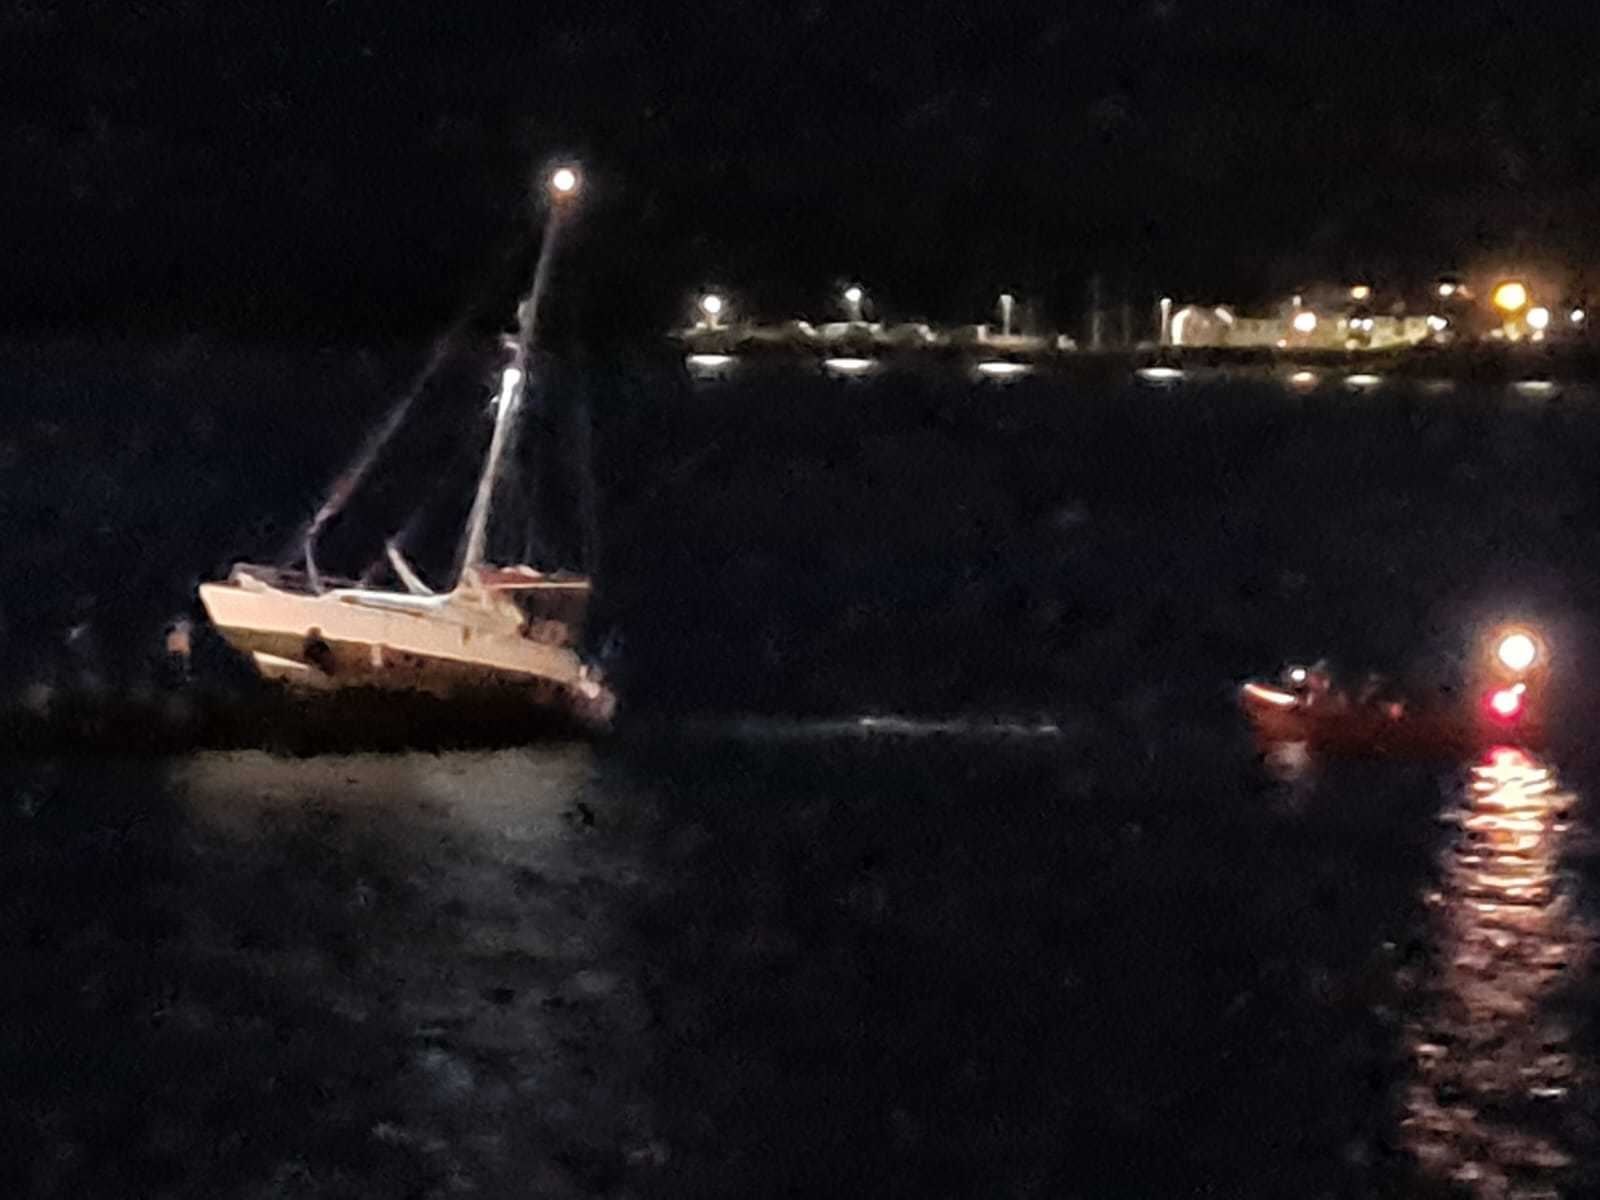 The yacht was secured before a return visit in daylight at high tide. Picture: Kyle Lifeboat RNLI